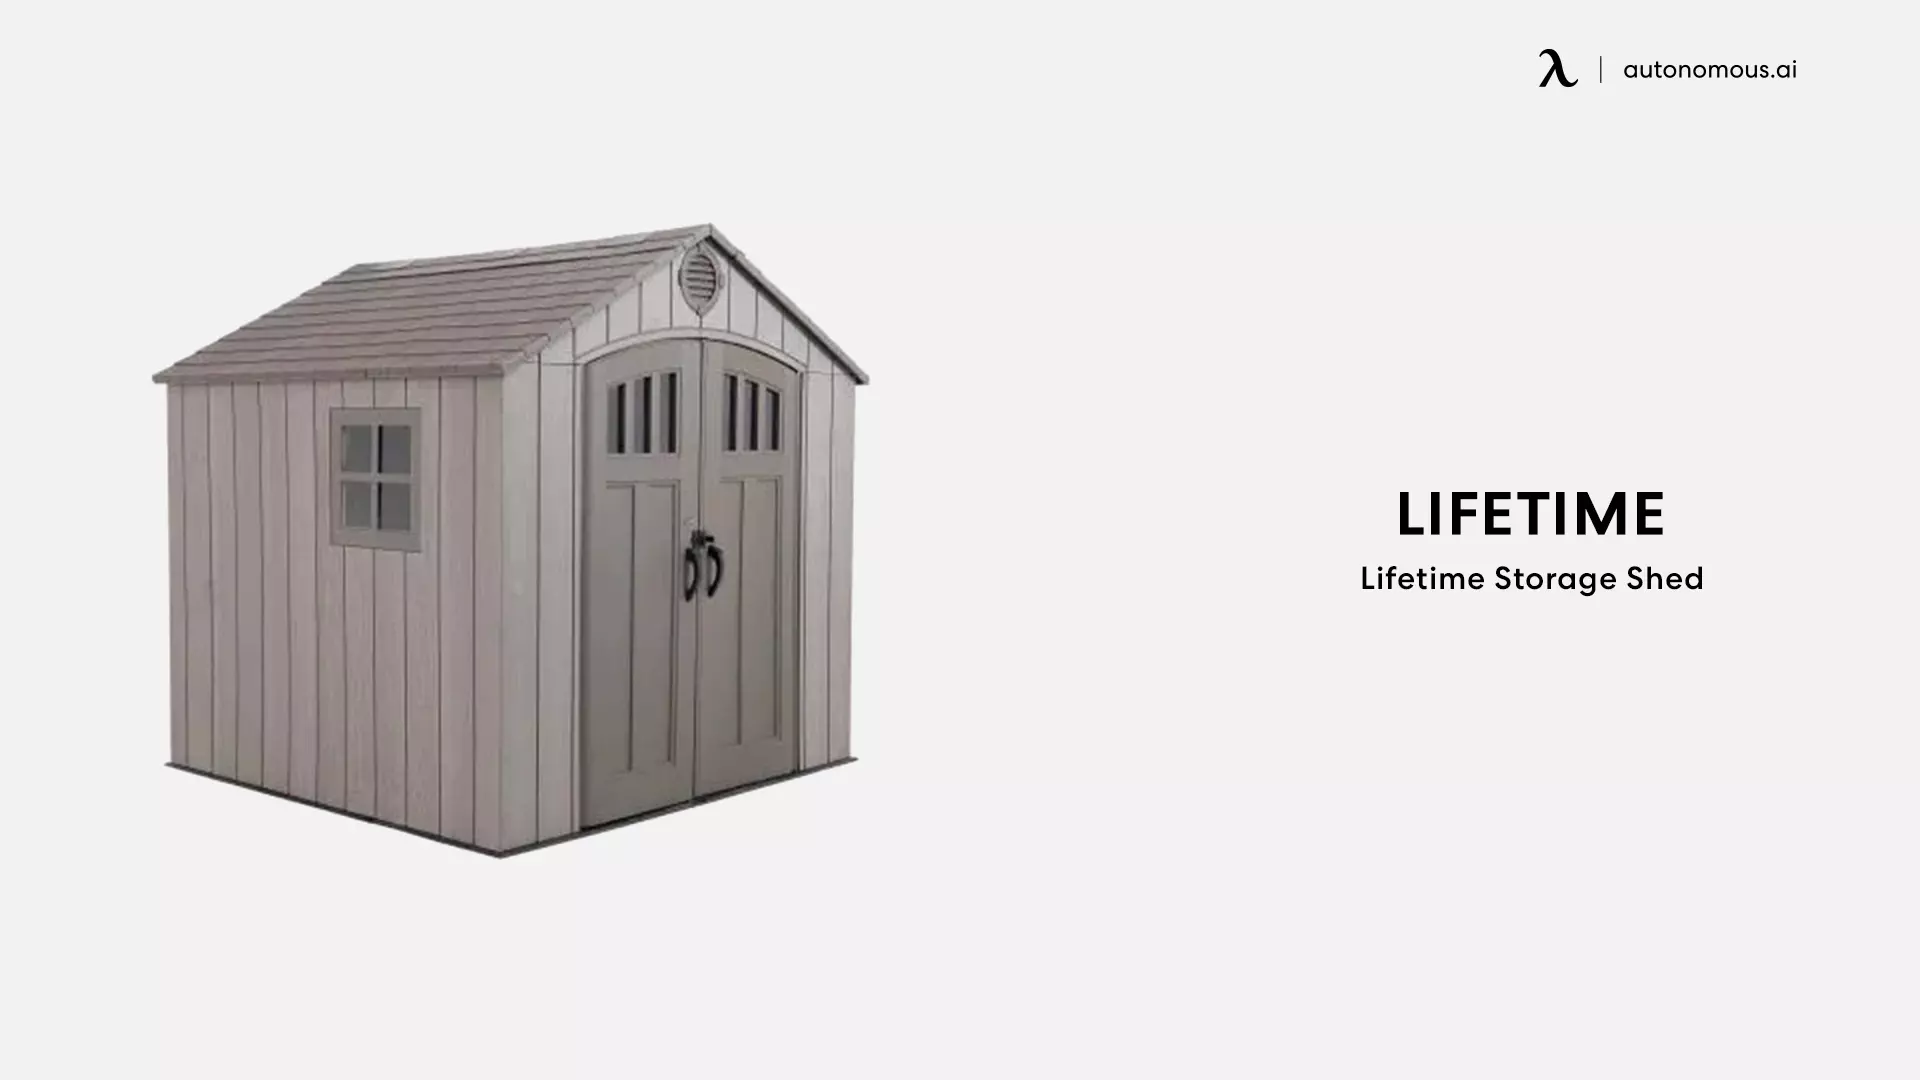 The Lifetime Storage Shed